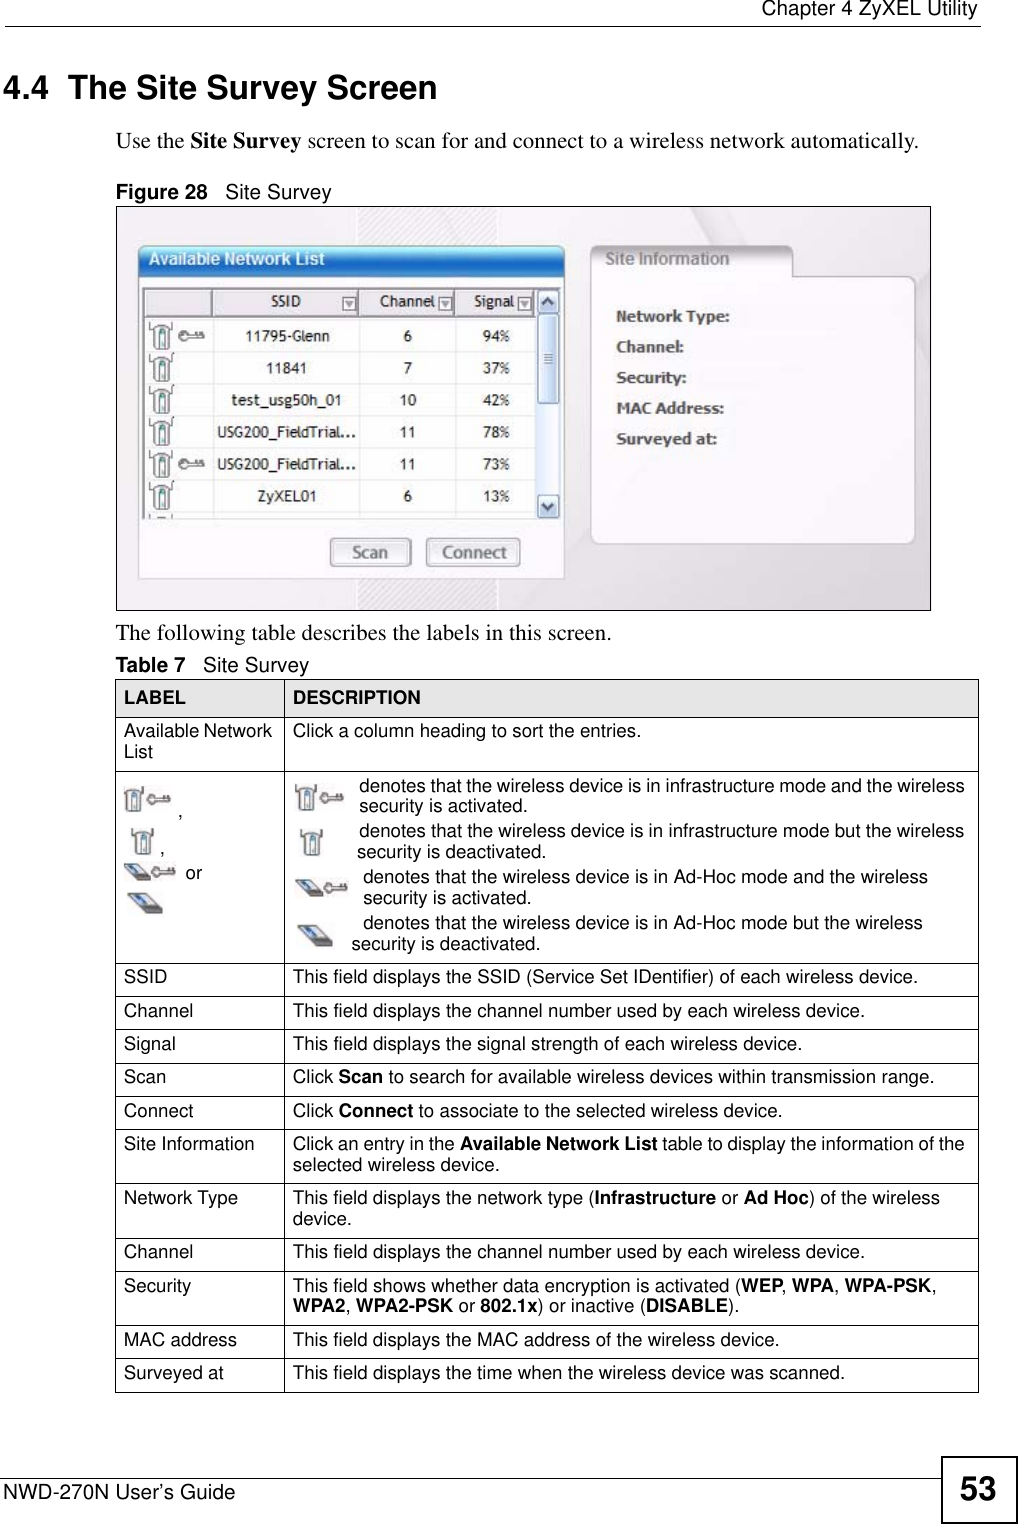  Chapter 4 ZyXEL UtilityNWD-270N User’s Guide 534.4  The Site Survey Screen Use the Site Survey screen to scan for and connect to a wireless network automatically.Figure 28   Site Survey The following table describes the labels in this screen. Table 7   Site Survey LABEL DESCRIPTIONAvailable Network List Click a column heading to sort the entries.,, ordenotes that the wireless device is in infrastructure mode and the wireless security is activated.denotes that the wireless device is in infrastructure mode but the wireless security is deactivated.denotes that the wireless device is in Ad-Hoc mode and the wireless security is activated.denotes that the wireless device is in Ad-Hoc mode but the wireless security is deactivated.SSID This field displays the SSID (Service Set IDentifier) of each wireless device.Channel This field displays the channel number used by each wireless device.Signal This field displays the signal strength of each wireless device.Scan Click Scan to search for available wireless devices within transmission range.Connect Click Connect to associate to the selected wireless device.Site Information Click an entry in the Available Network List table to display the information of the selected wireless device.Network Type  This field displays the network type (Infrastructure or Ad Hoc) of the wireless device.Channel This field displays the channel number used by each wireless device.Security This field shows whether data encryption is activated (WEP, WPA, WPA-PSK, WPA2, WPA2-PSK or 802.1x) or inactive (DISABLE).MAC address  This field displays the MAC address of the wireless device.Surveyed at  This field displays the time when the wireless device was scanned.